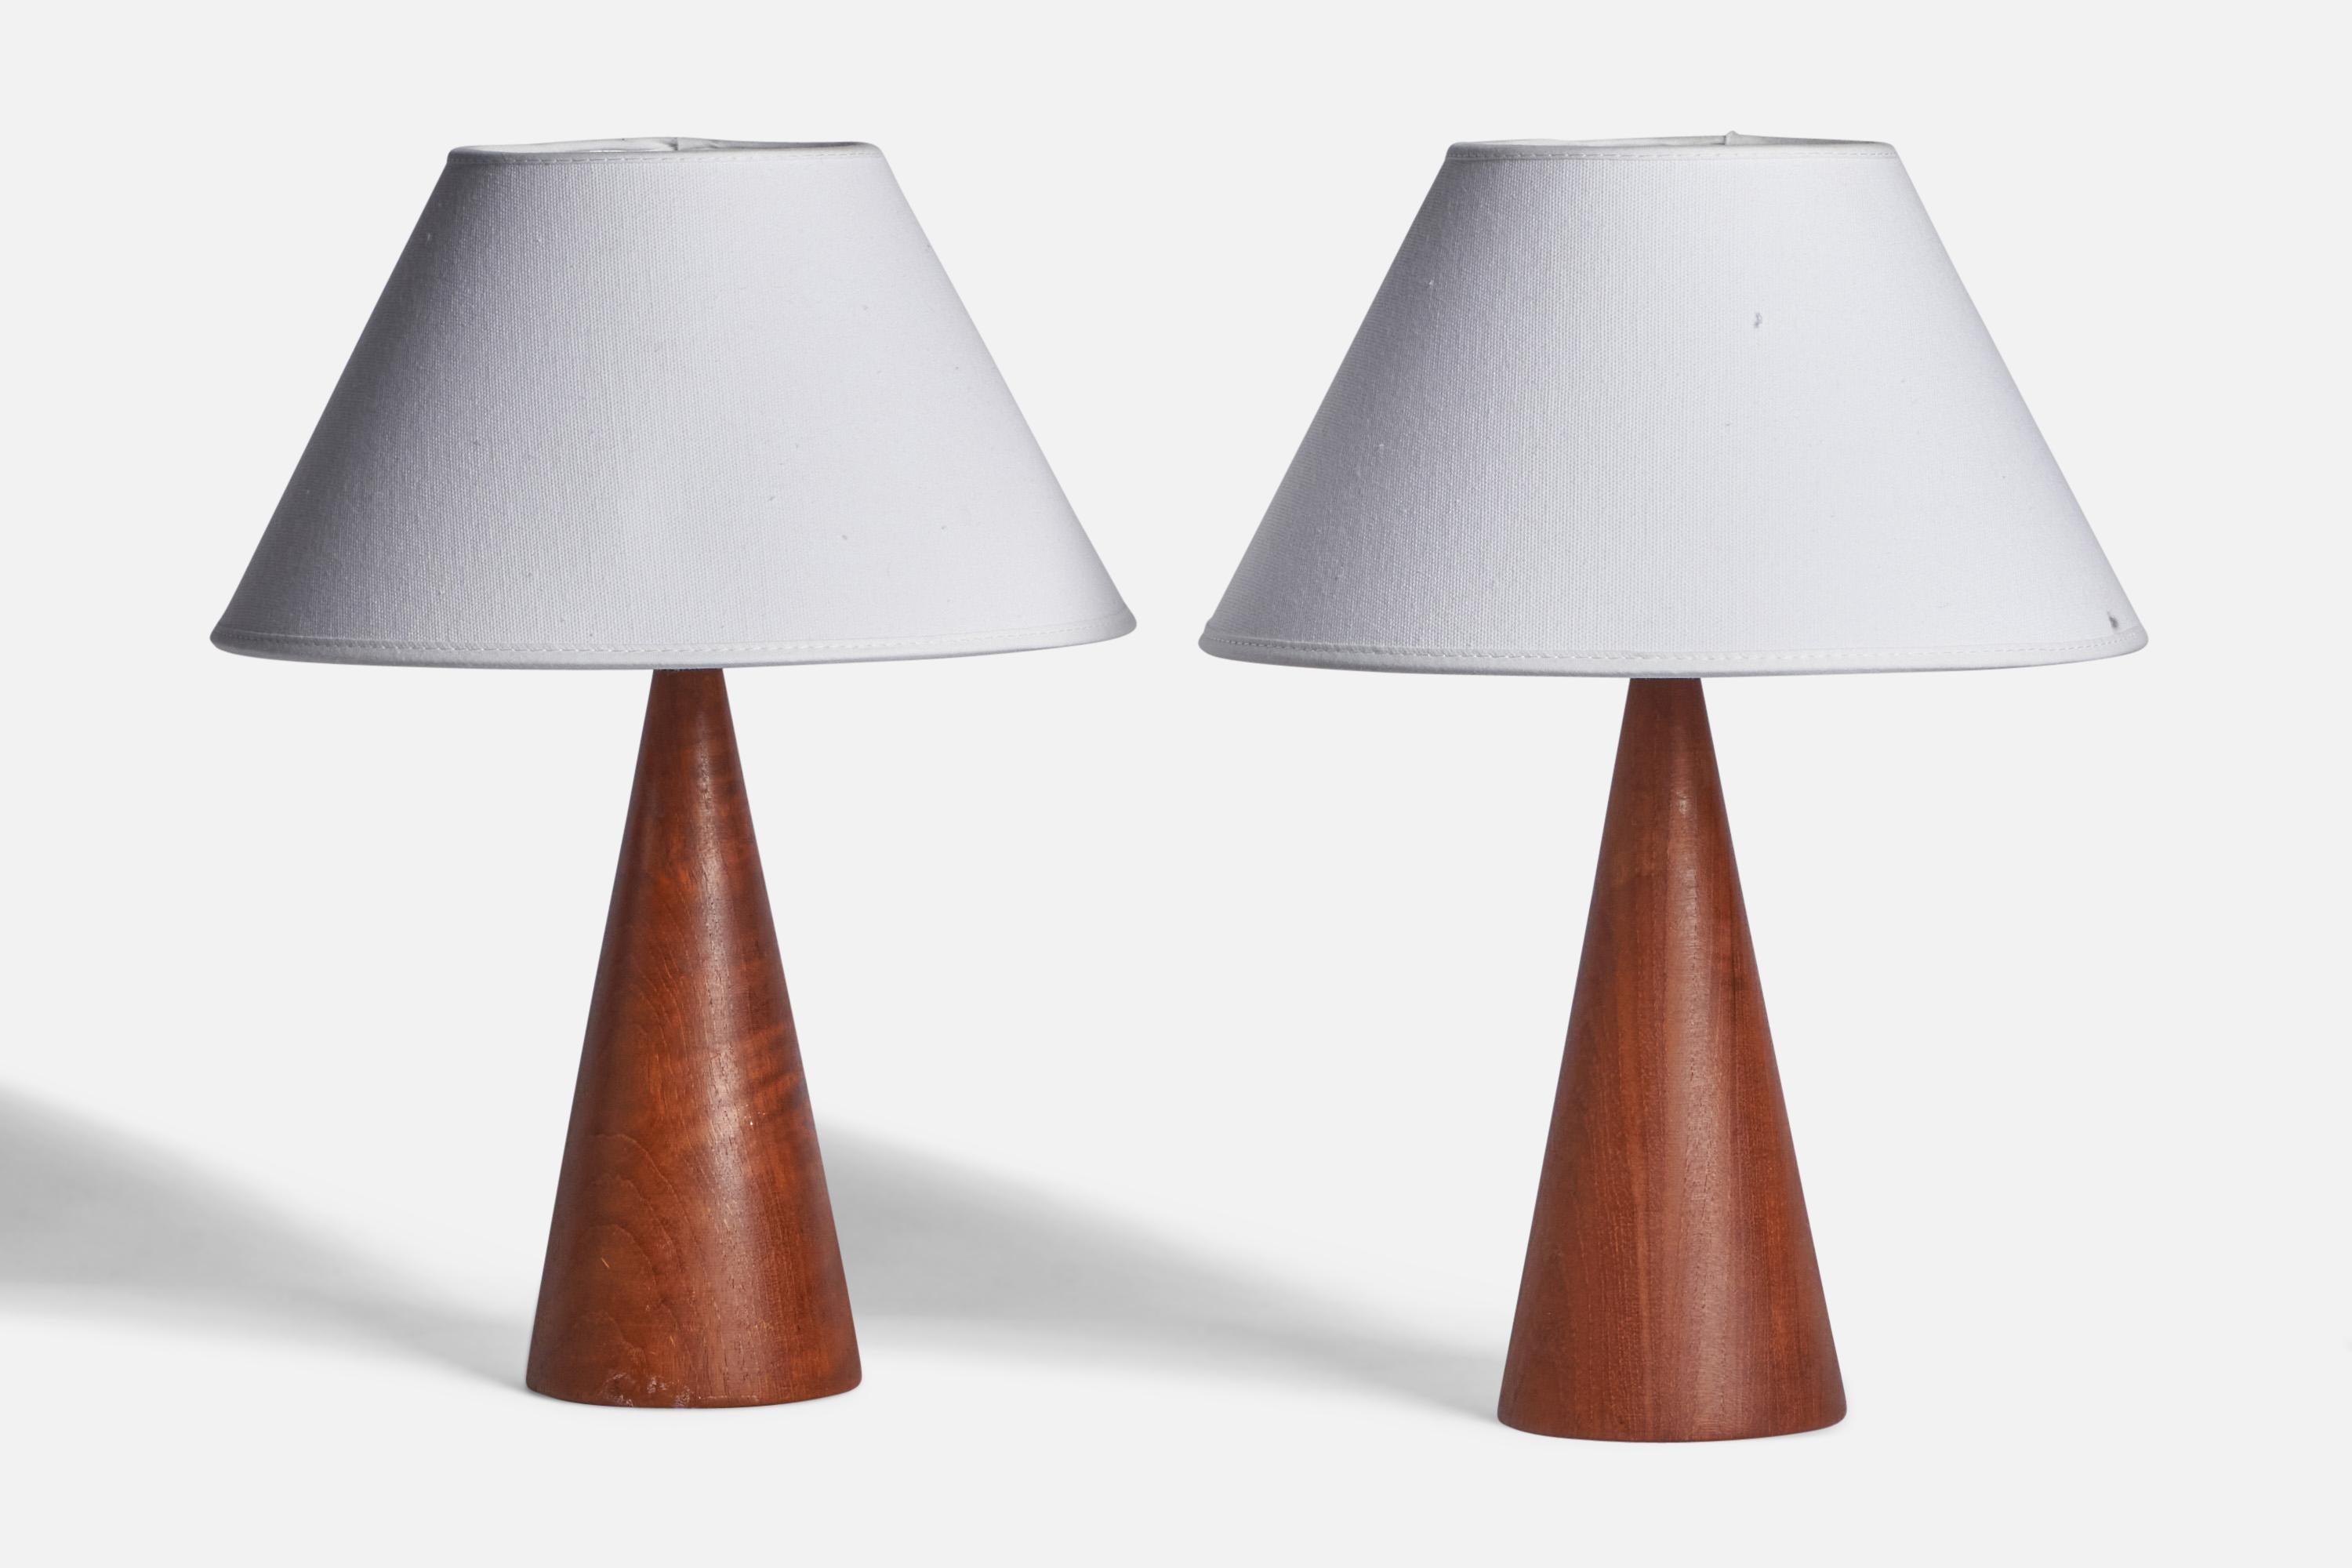 
A pair of teak table lamp designed and produced in Sweden, c. 1950s.
Dimensions of Lamp (inches): 12.75” H x 5.80” Diameter
Dimensions of Shade (inches): 4.5” Top Diameter x 10” Bottom Diameter x 5.5” H 
Dimensions of Lamp with Shade (inches):